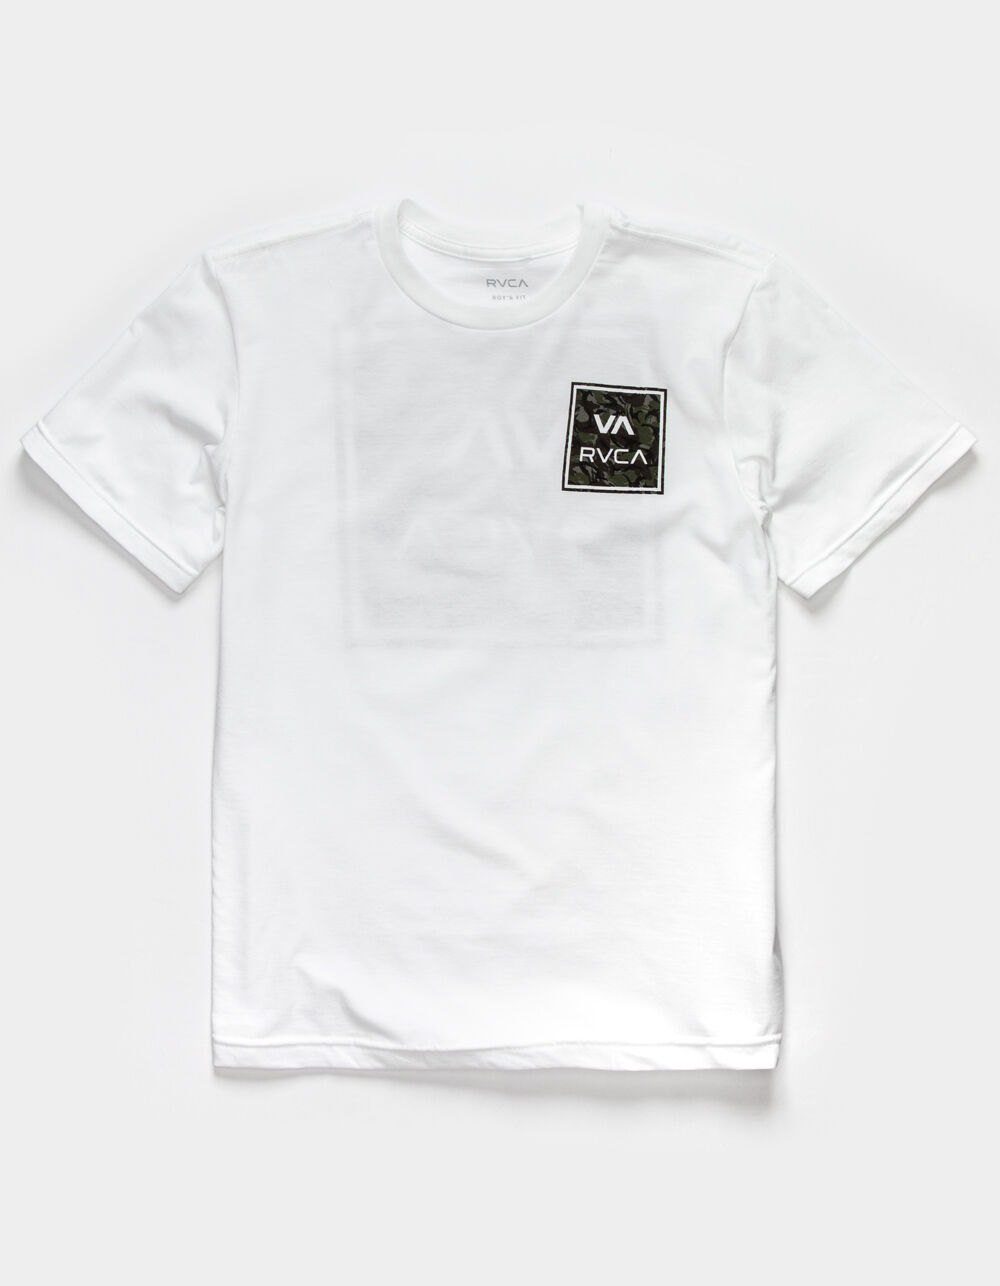 RVCA All The Way Boys T-Shirt - WHITE | Tillys